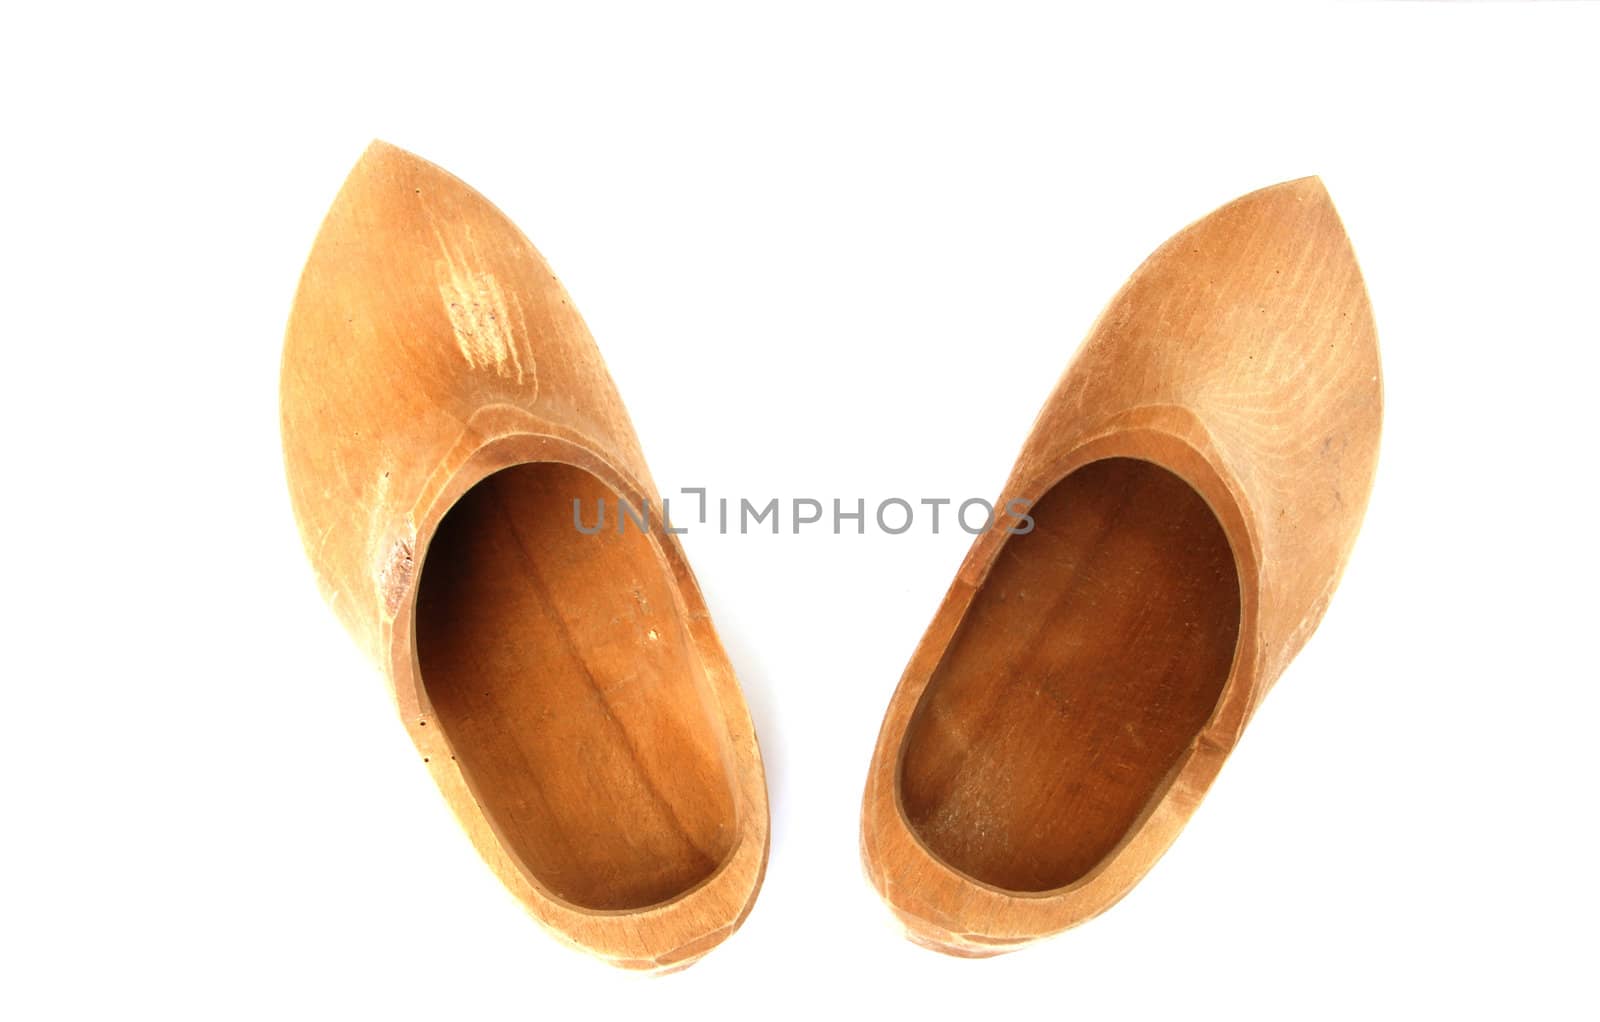 A pair of ancient wooden shoes on white 